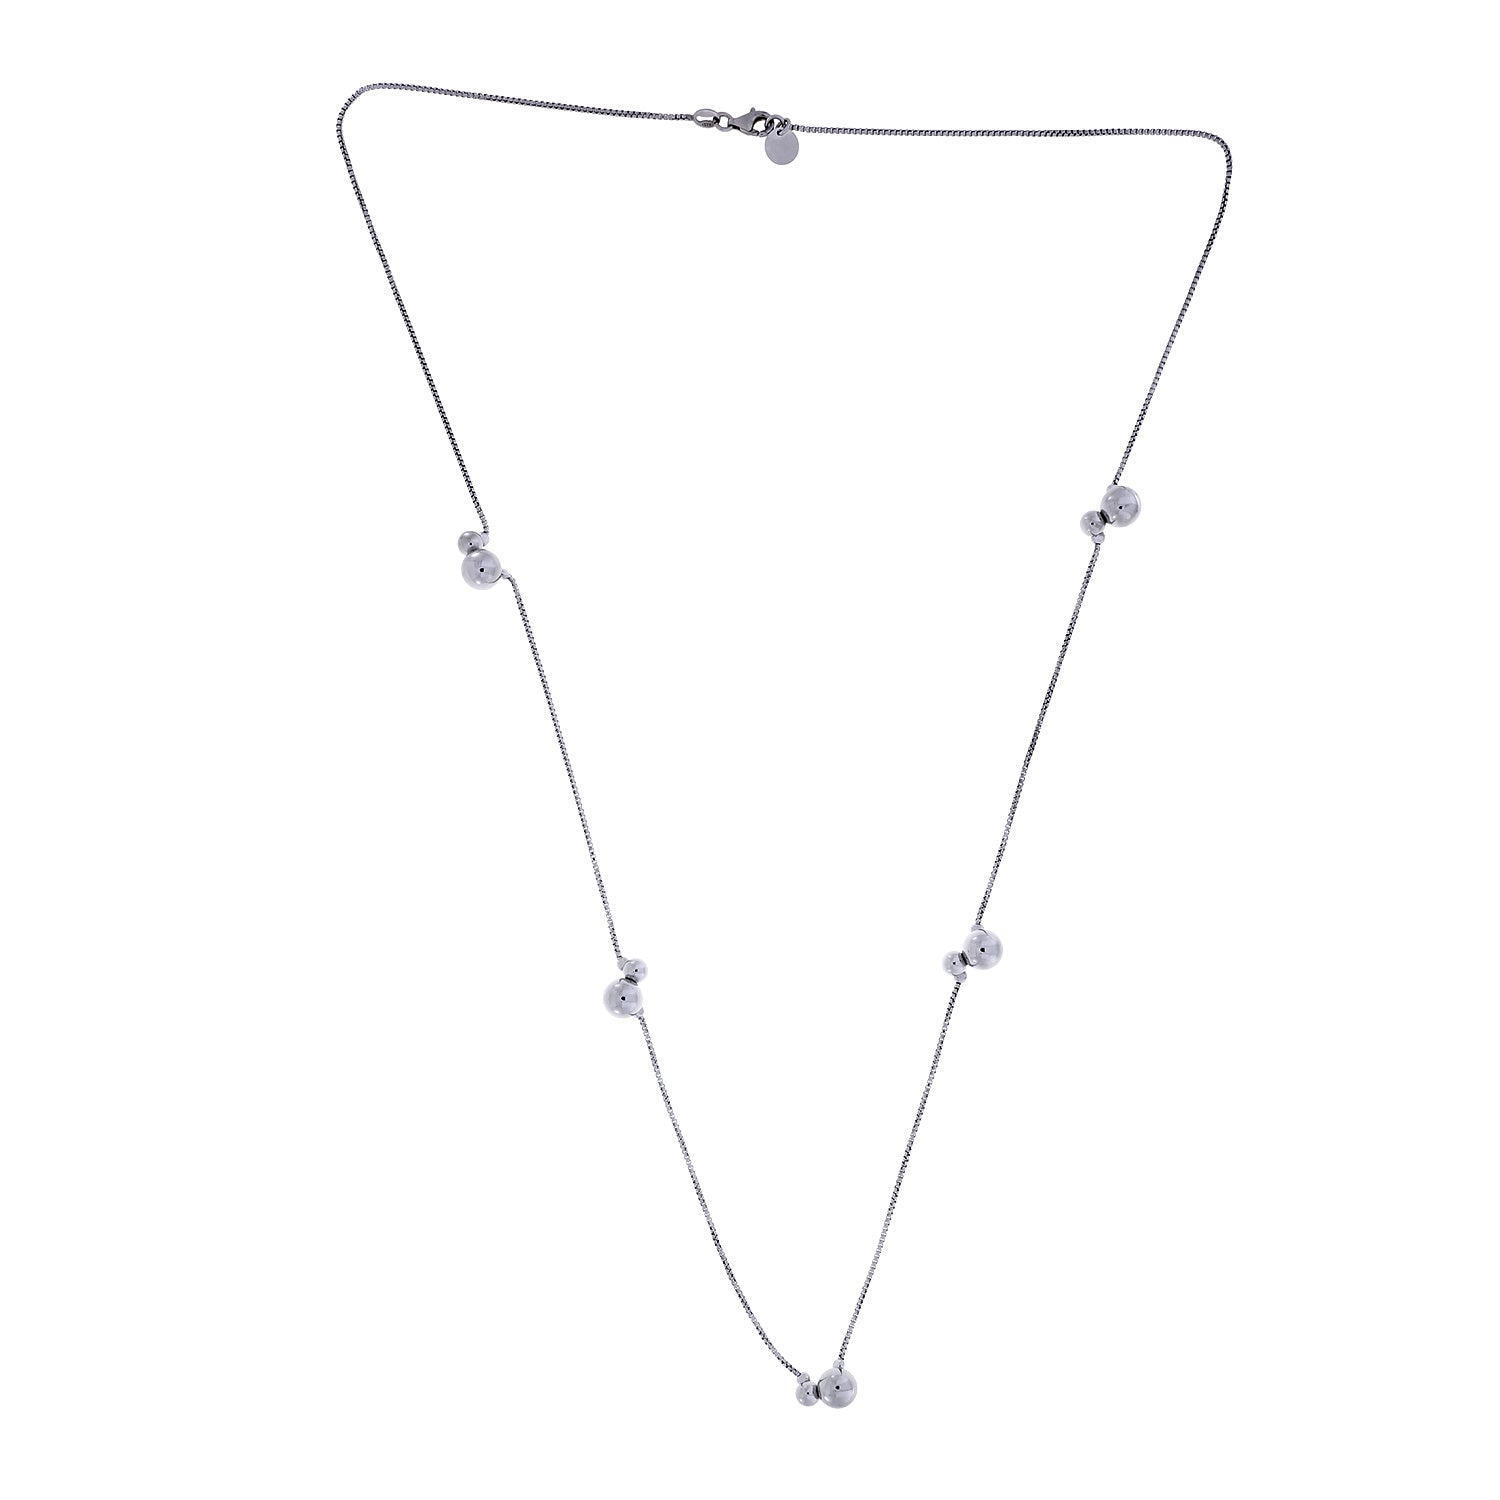 Silver Double Beads Long Necklace